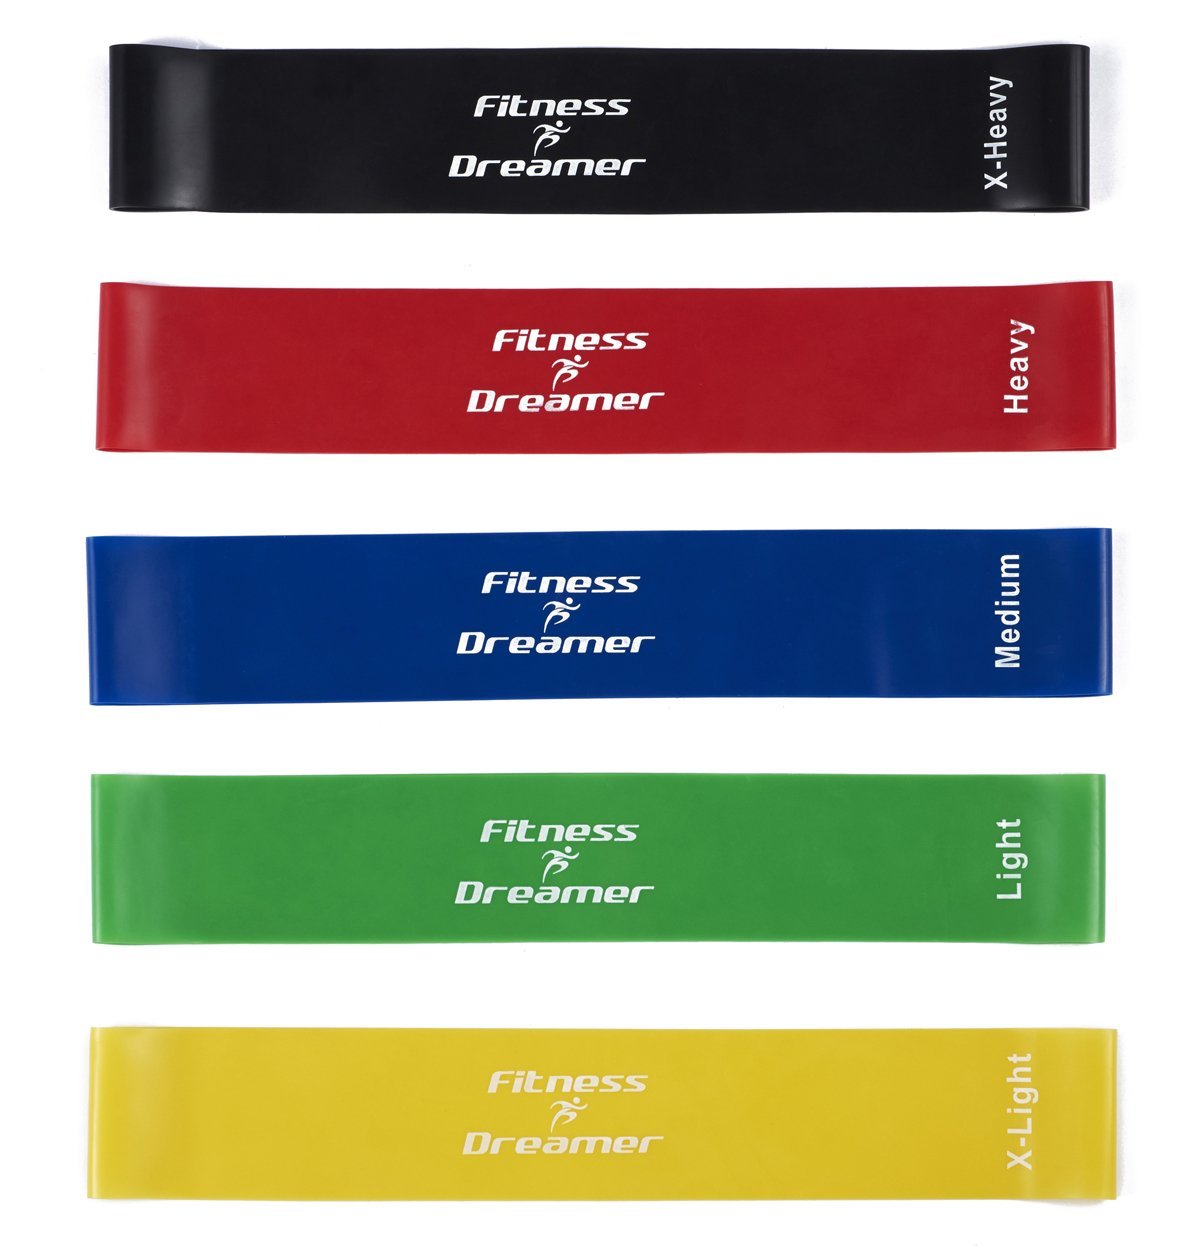 Fitness Dreamer Resistance Bands, Exercise Loop bands and Workout Bands by Set of 5, 12 In. Fitness Bands for Training or Physical Therapy-Improve Mobility and Strength - image 2 of 7